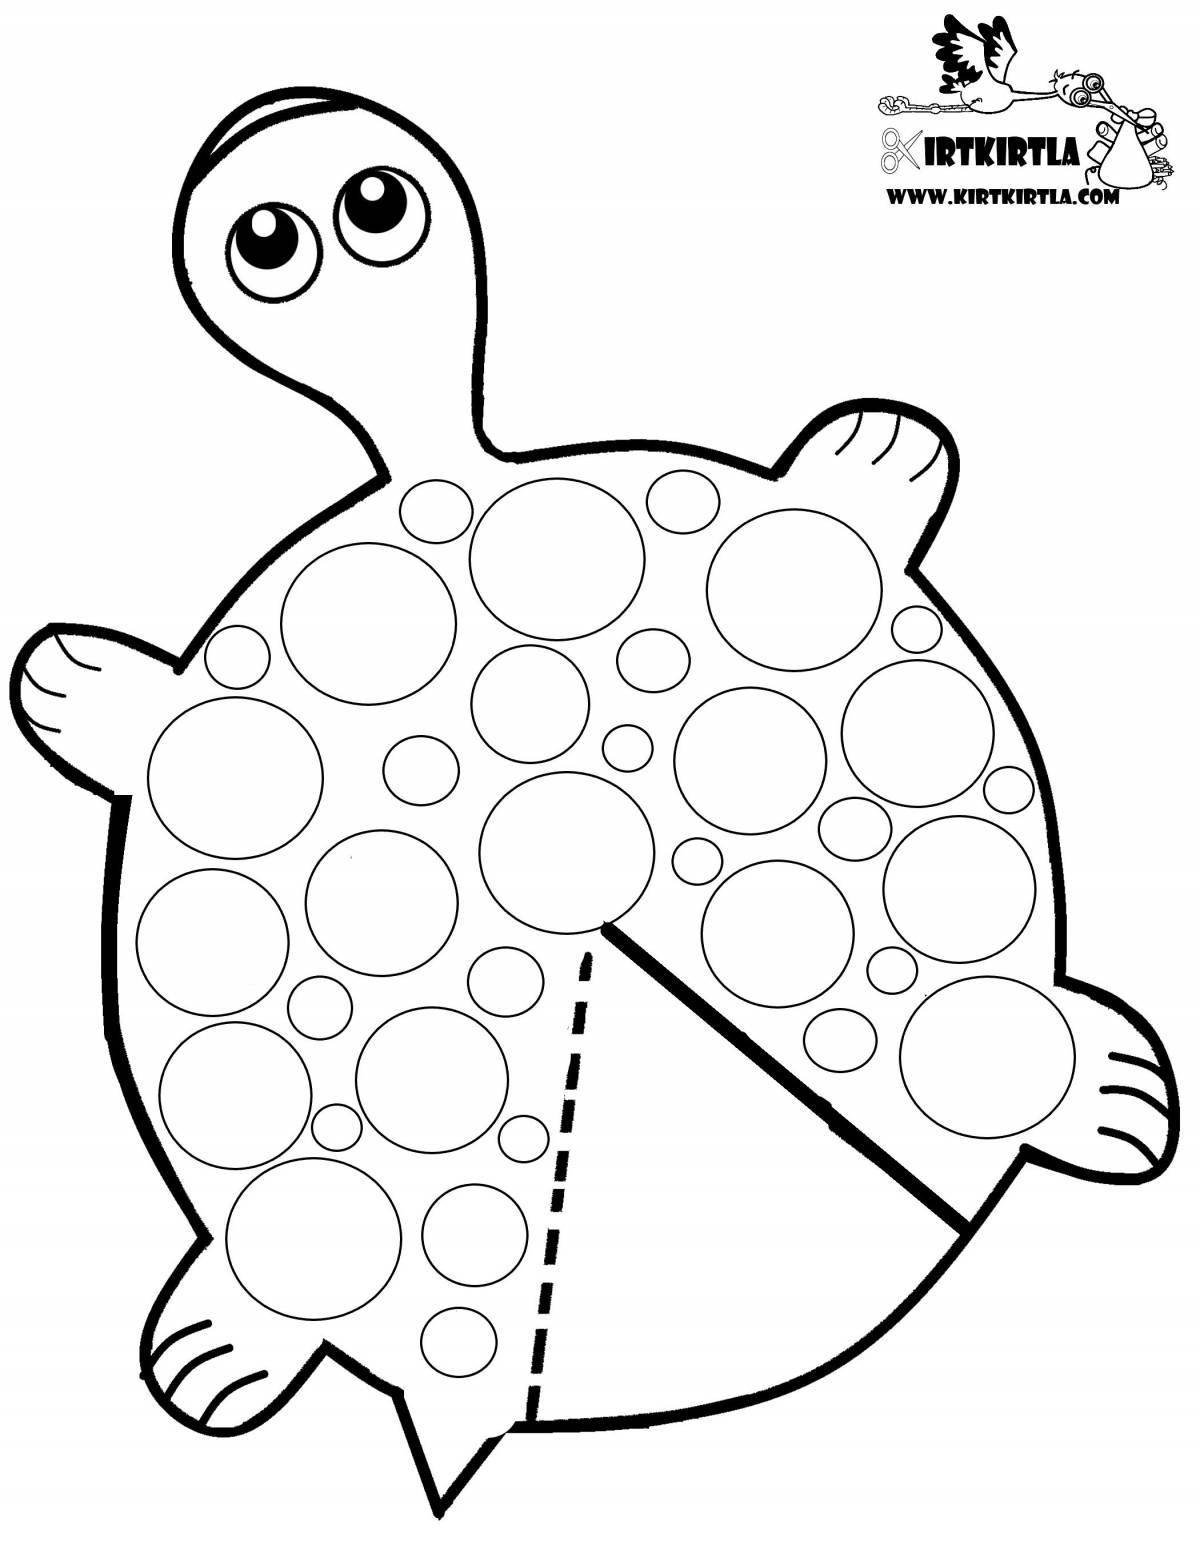 Coloring page elegant patterns do it yourself